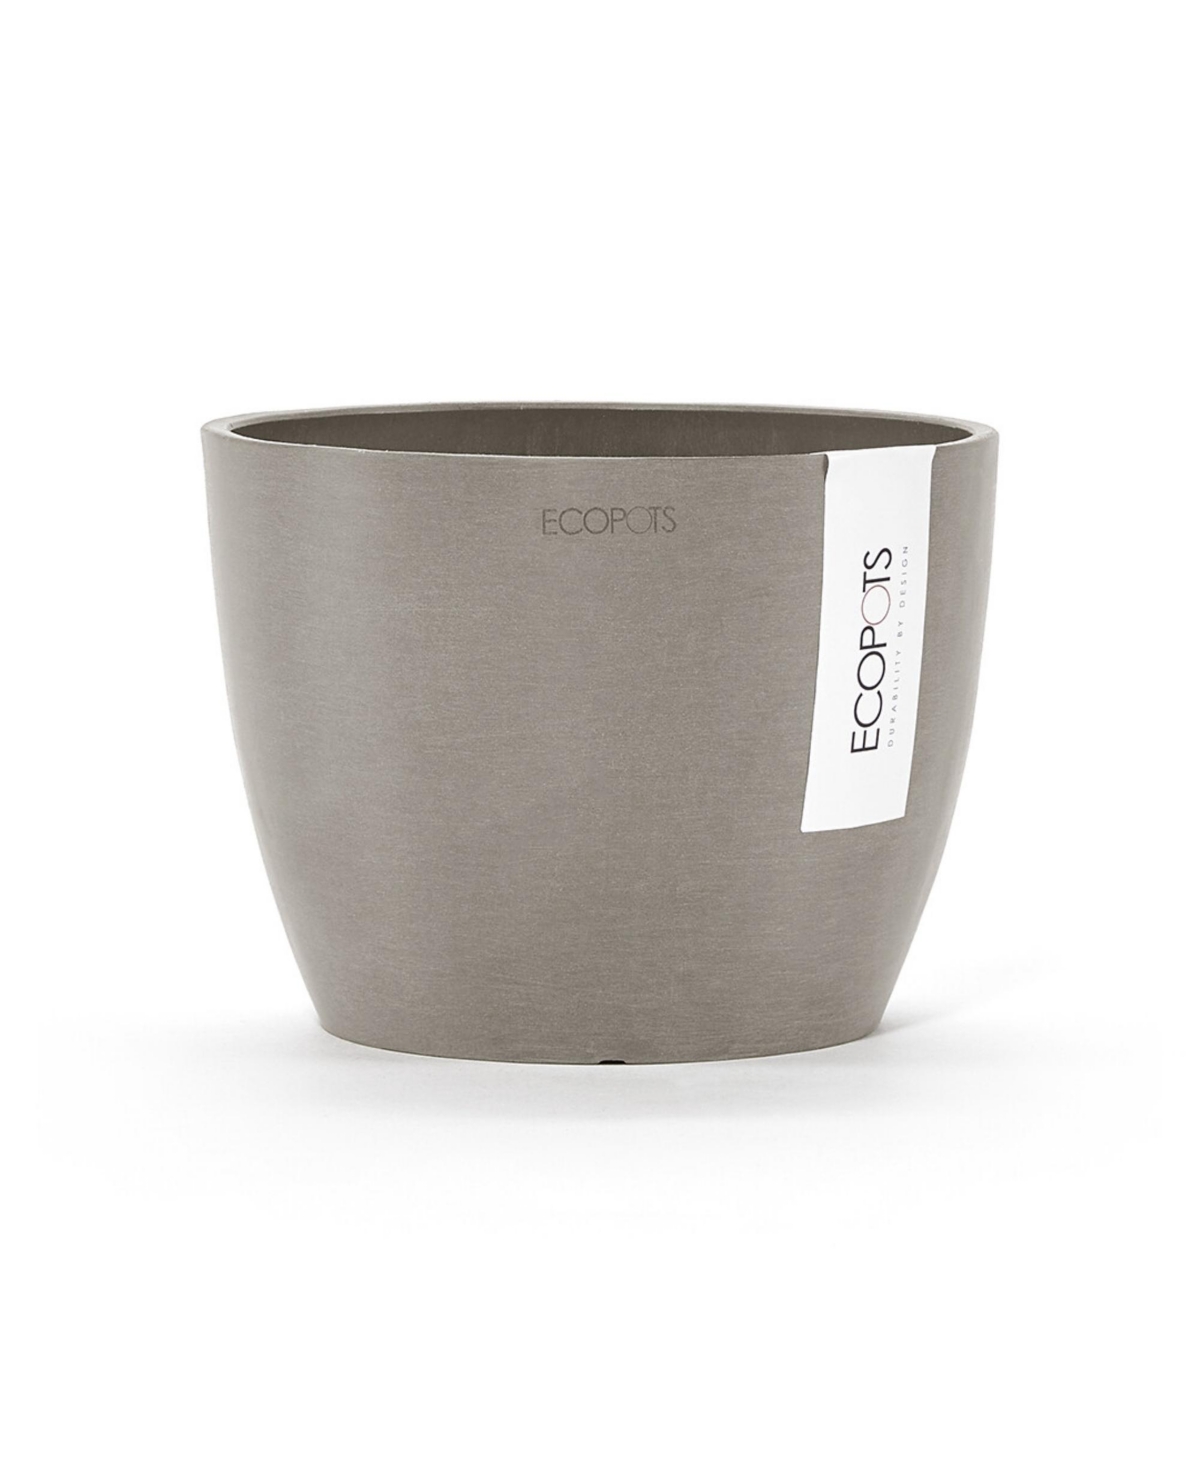 Stockholm Indoor and Outdoor Modern Flower Pot Planter, 6in - Taupe